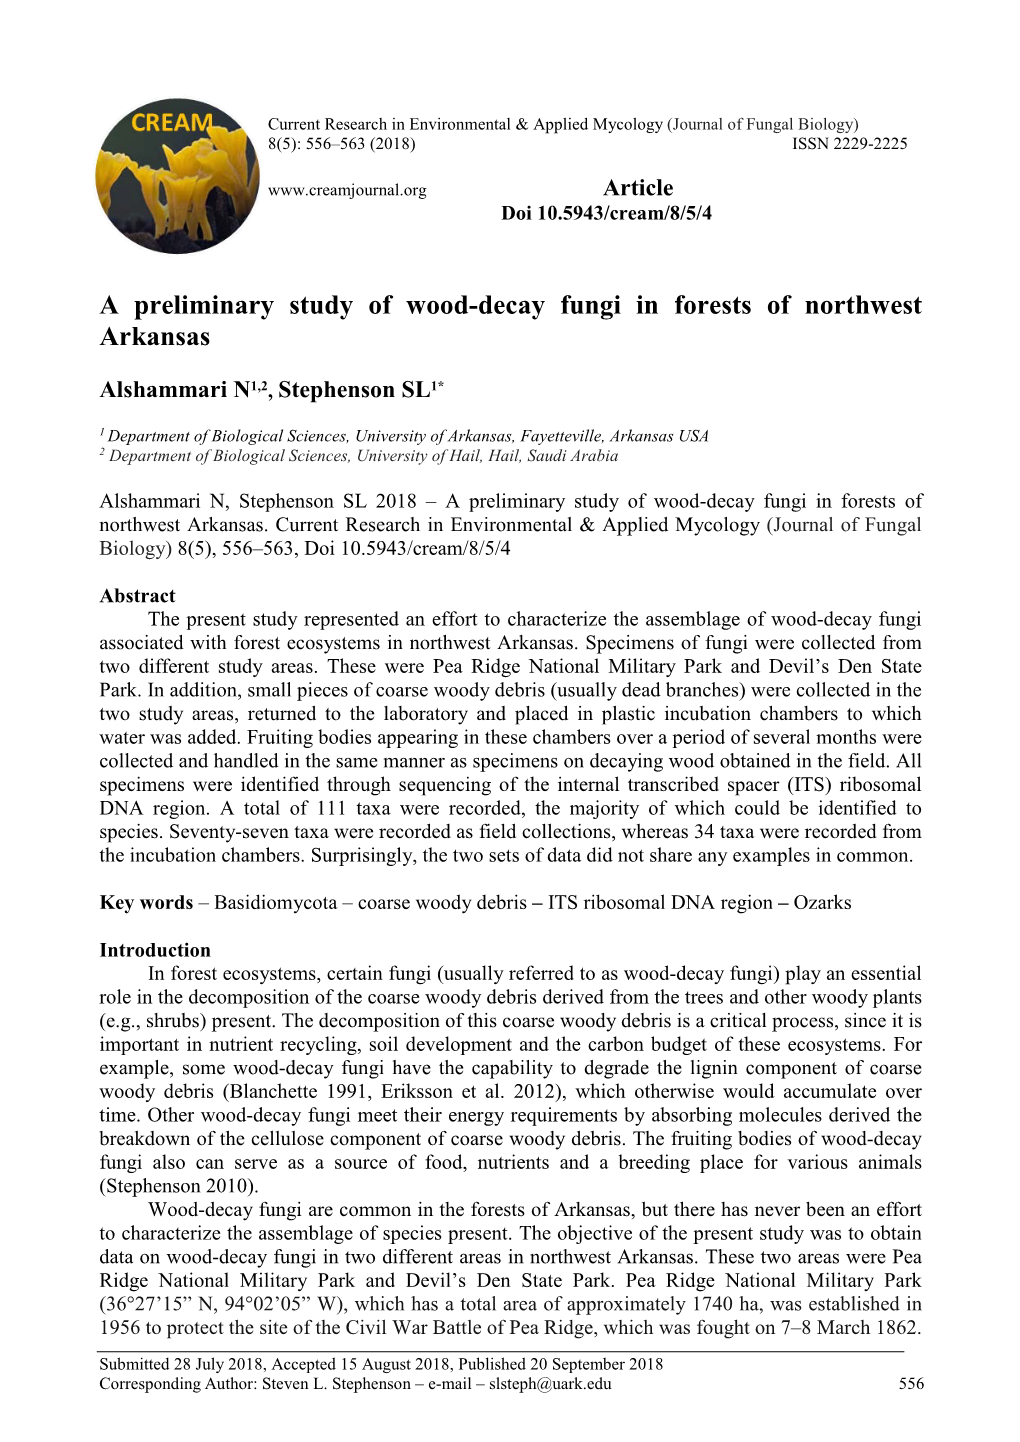 A Preliminary Study of Wood-Decay Fungi in Forests of Northwest Arkansas